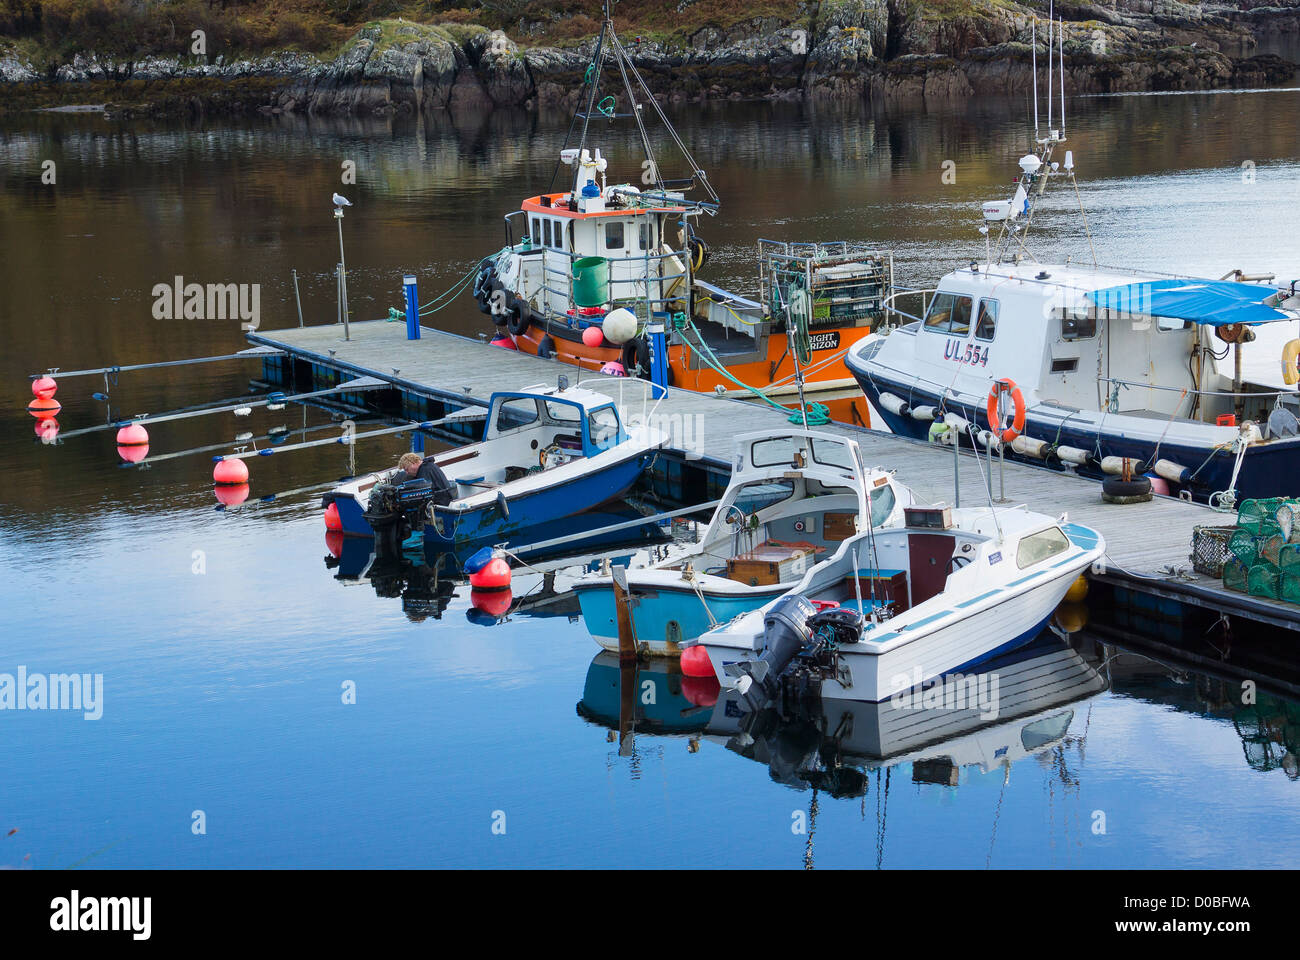 Fishing trawlers and recreational boats reflected in the still waters at Charlestown harbor at Gairloch. Stock Photo